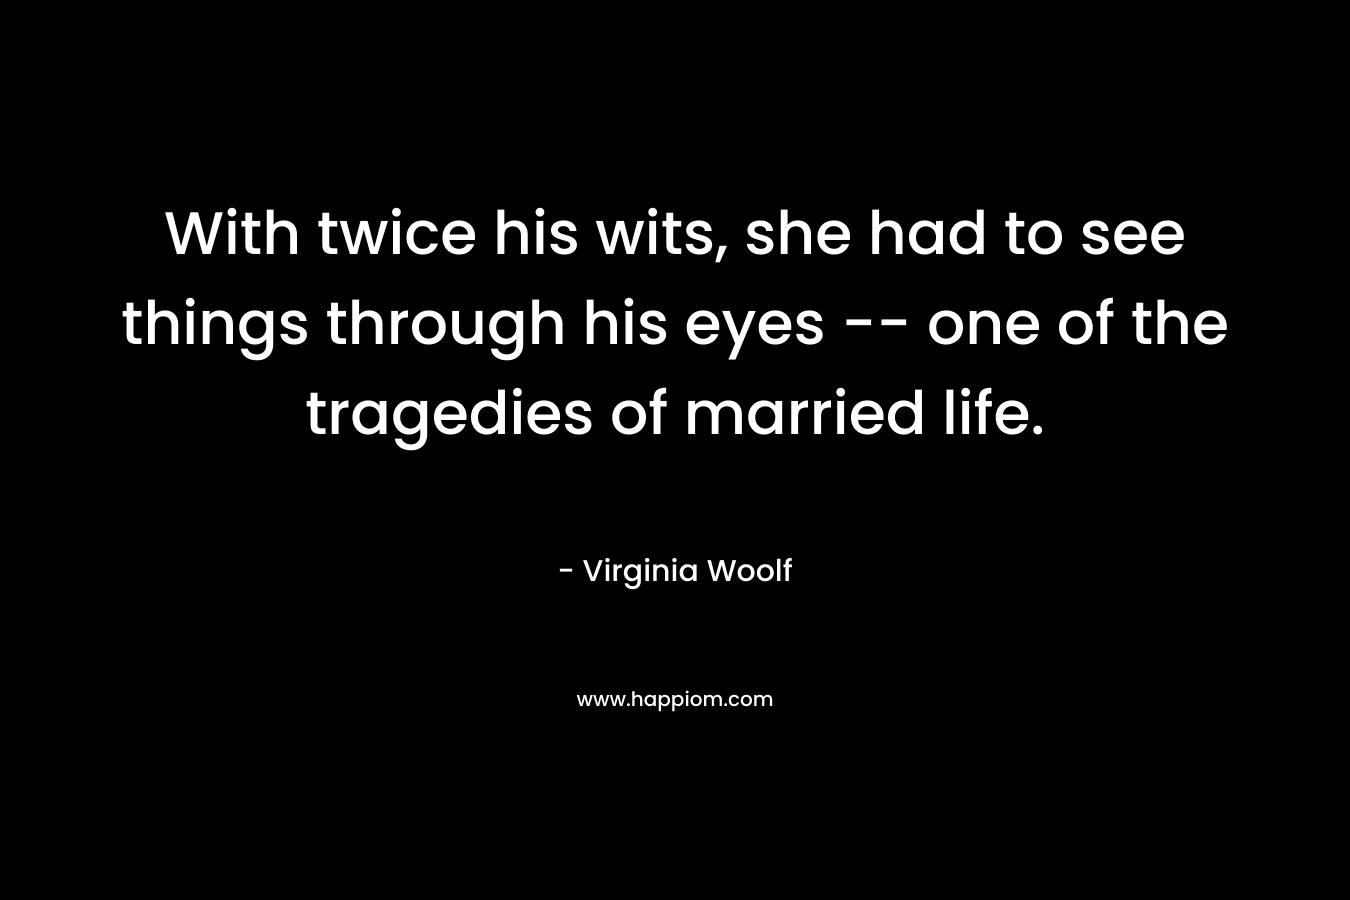 With twice his wits, she had to see things through his eyes -- one of the tragedies of married life.